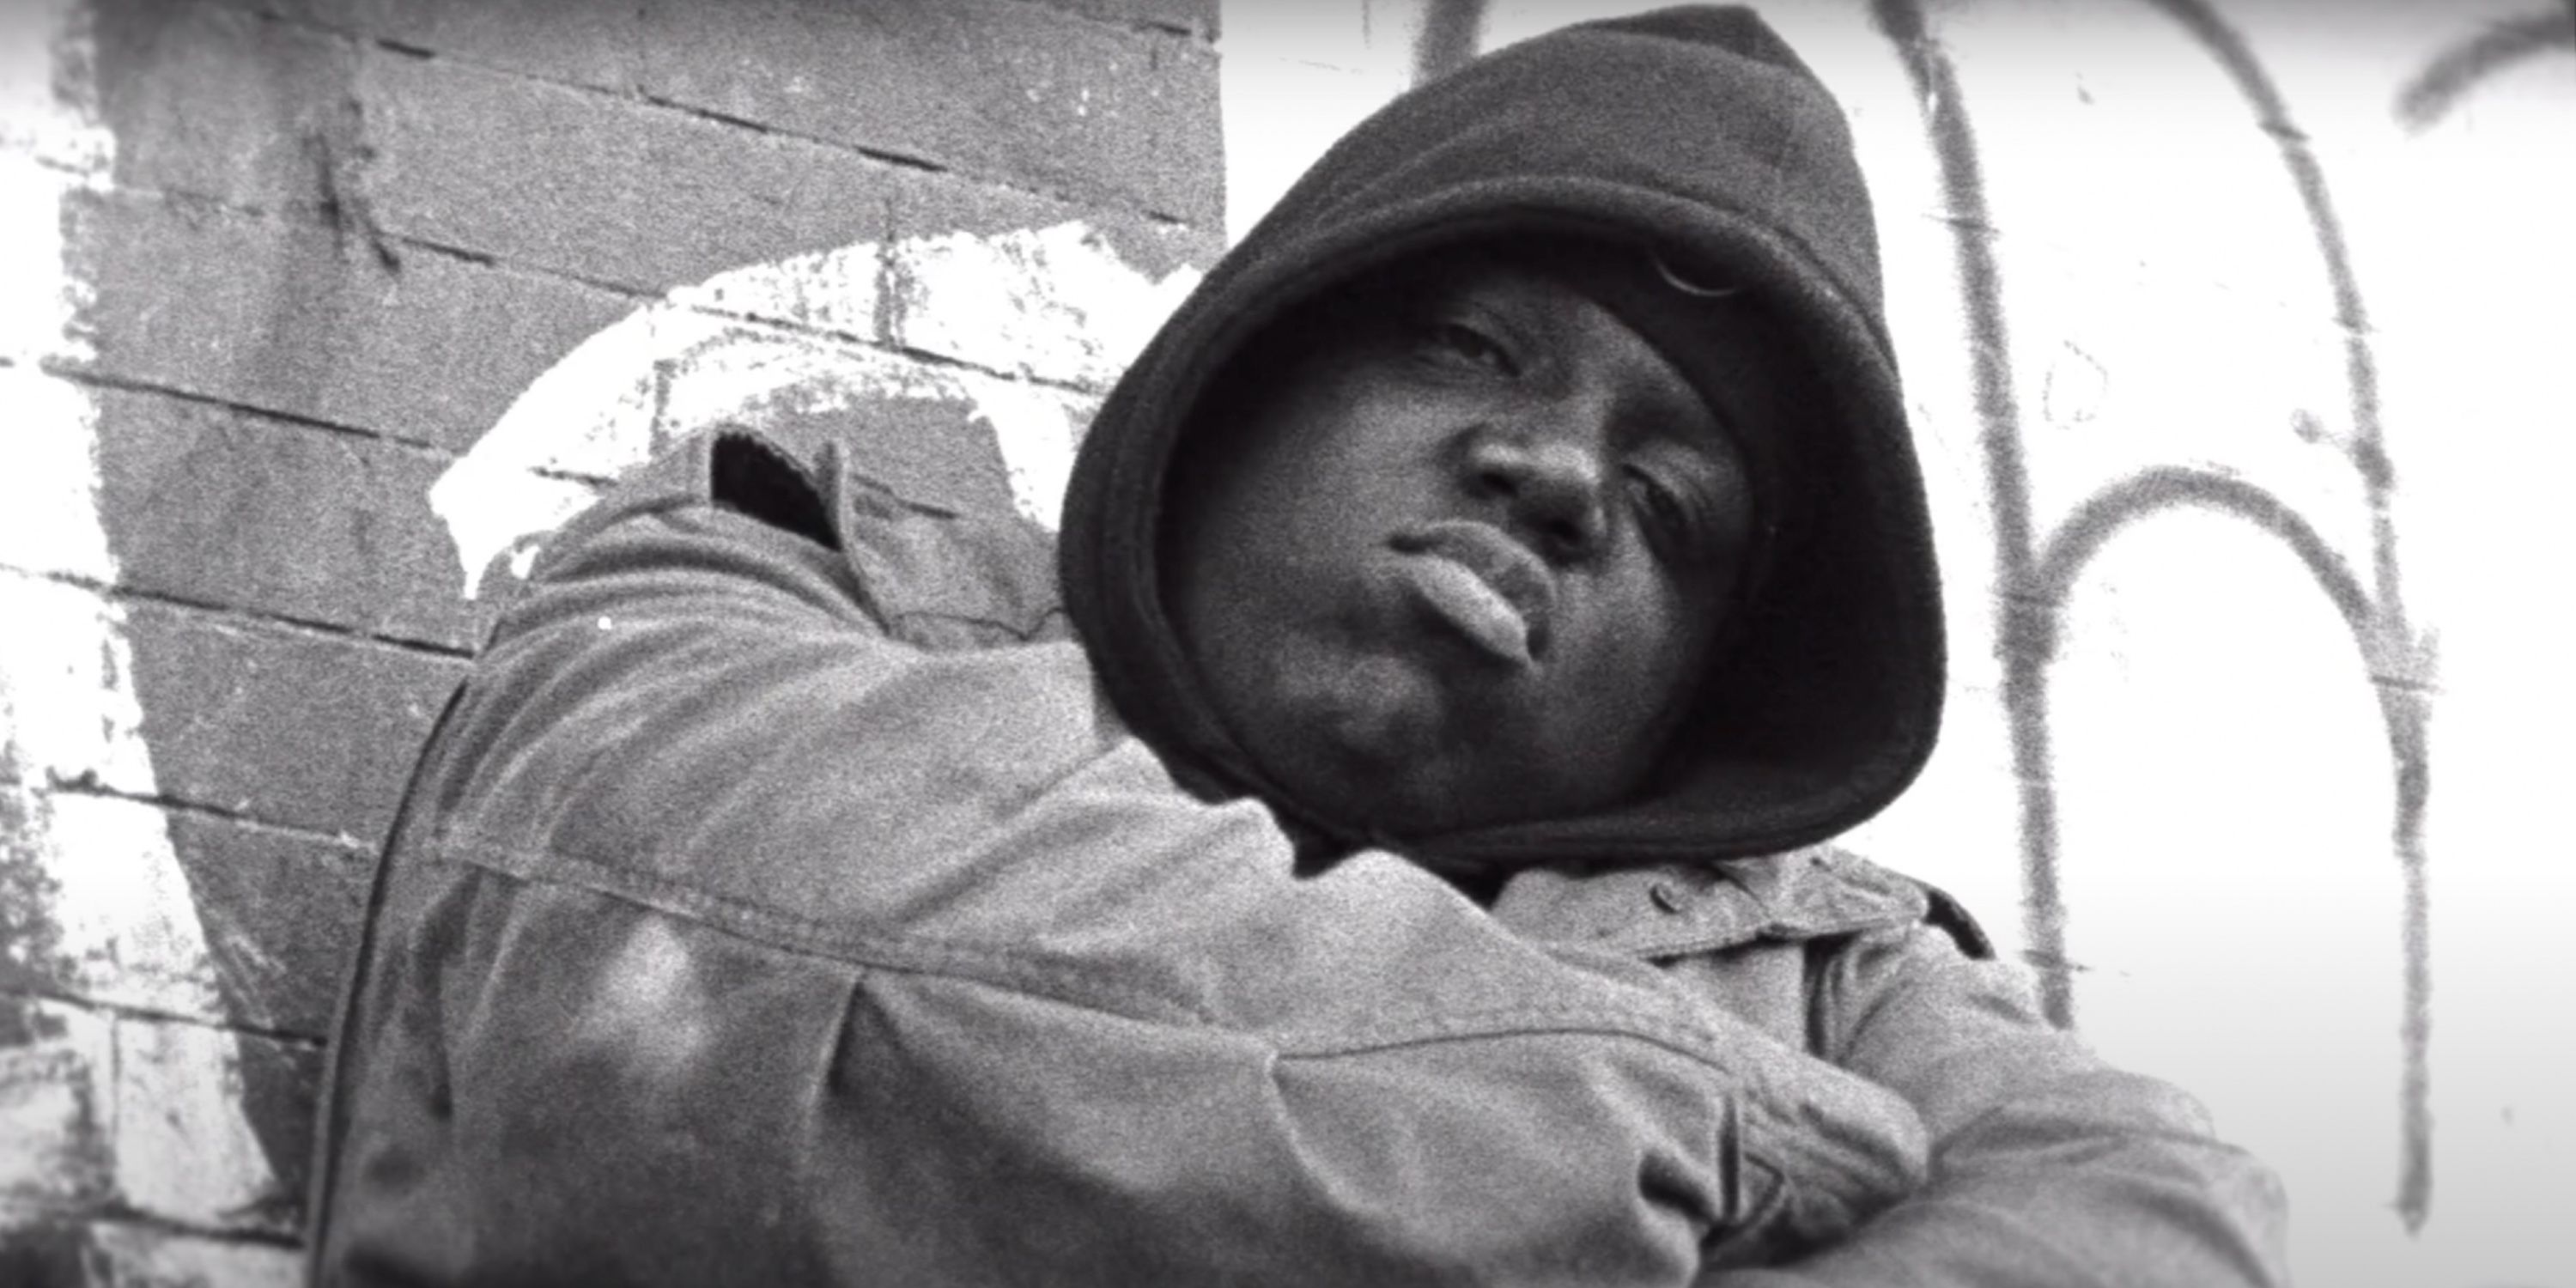 Christopher Wallace AKA The Notorious B.I.G. poses for cameras in Biggie: I Got a Story to Tell on Netflix